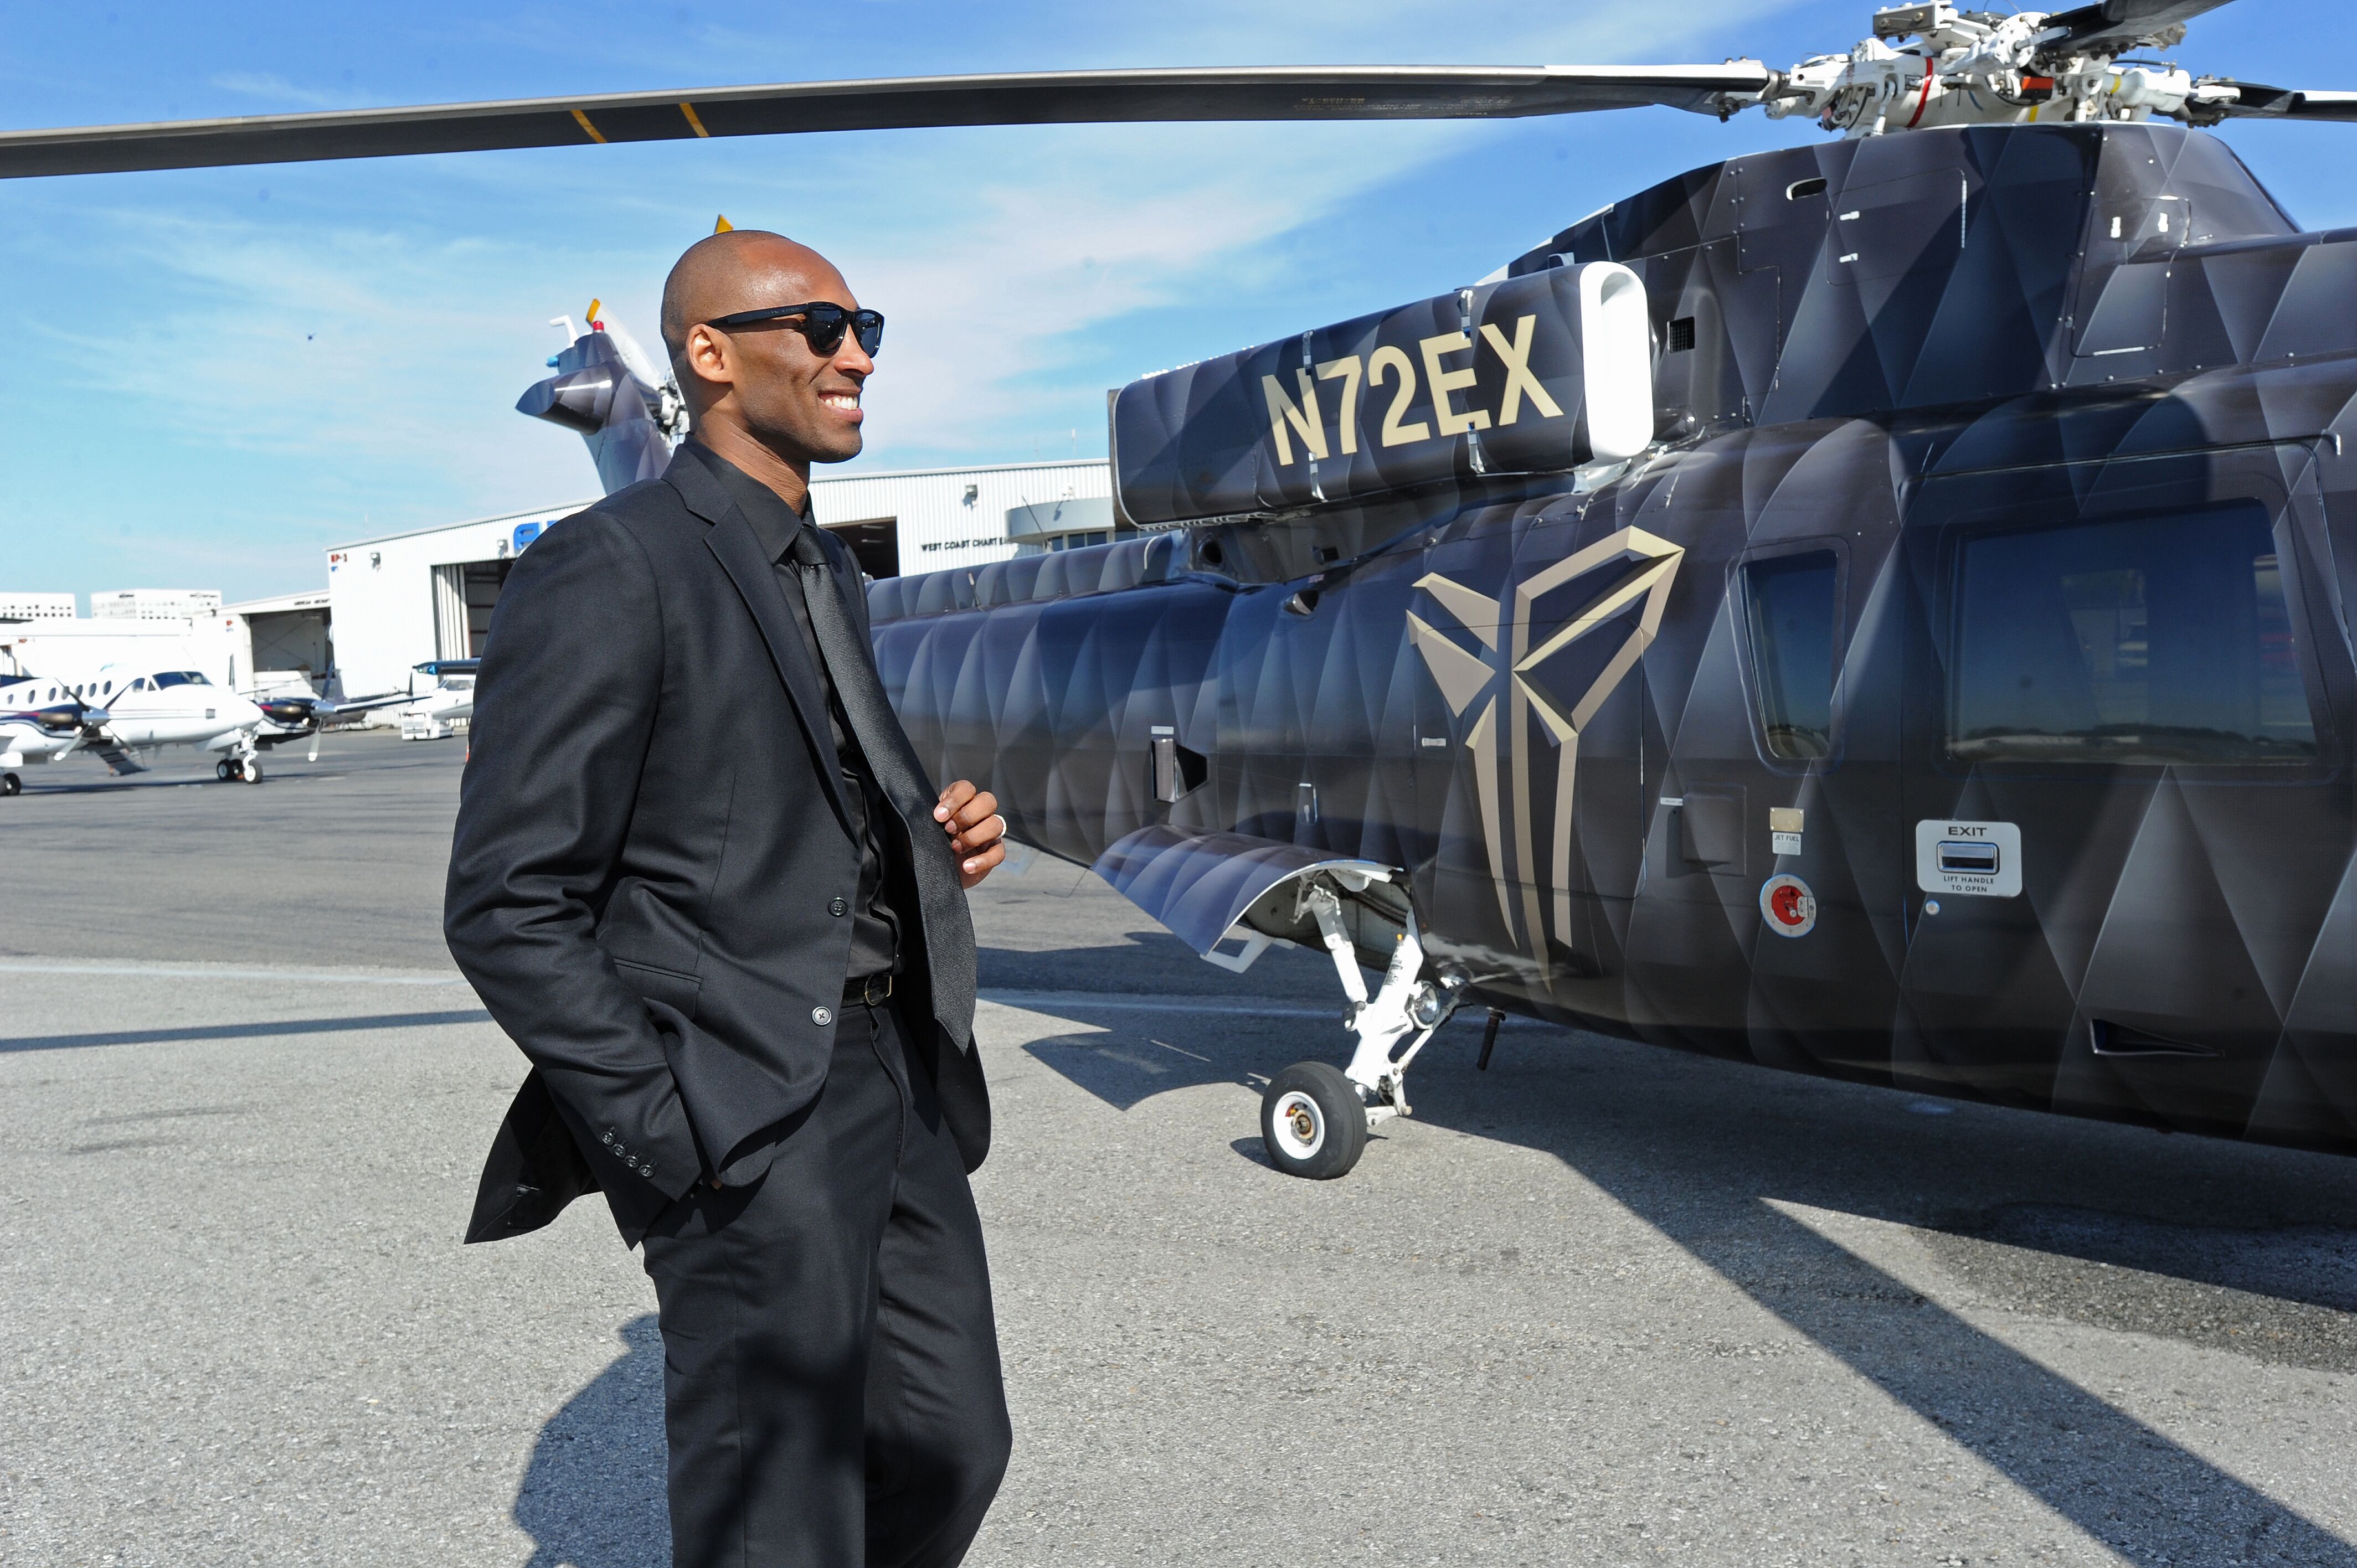 Kobe Bryant boarding a helicopter on the way to his last game against the Utah Jazz in April 2016/ Source: Getty Images